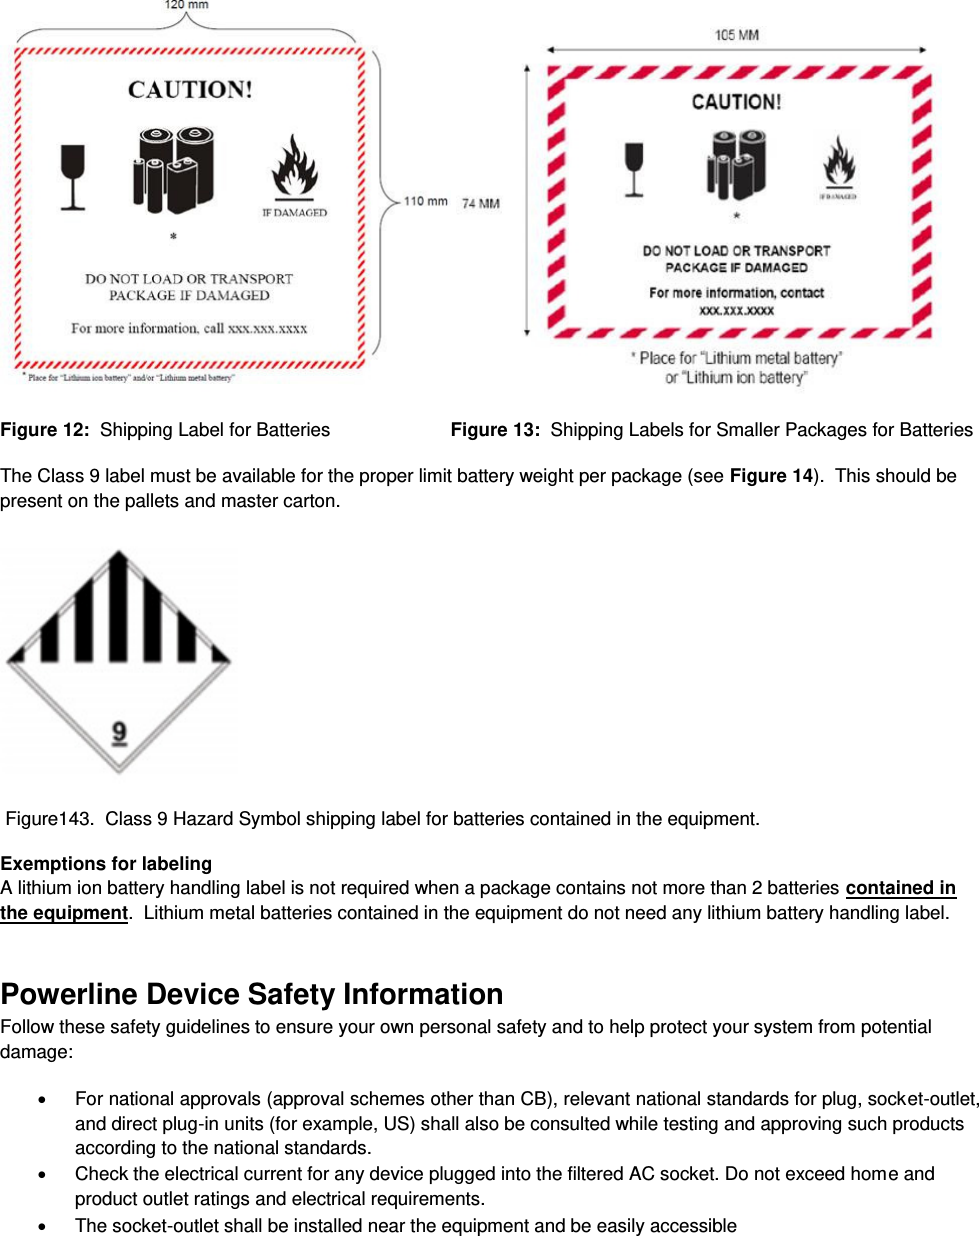    Figure 12:  Shipping Label for Batteries                       Figure 13:  Shipping Labels for Smaller Packages for Batteries The Class 9 label must be available for the proper limit battery weight per package (see Figure 14).  This should be present on the pallets and master carton.   Figure143.  Class 9 Hazard Symbol shipping label for batteries contained in the equipment. Exemptions for labeling A lithium ion battery handling label is not required when a package contains not more than 2 batteries contained in the equipment.  Lithium metal batteries contained in the equipment do not need any lithium battery handling label. Powerline Device Safety Information Follow these safety guidelines to ensure your own personal safety and to help protect your system from potential damage:   For national approvals (approval schemes other than CB), relevant national standards for plug, socket-outlet, and direct plug-in units (for example, US) shall also be consulted while testing and approving such products according to the national standards.    Check the electrical current for any device plugged into the filtered AC socket. Do not exceed home and product outlet ratings and electrical requirements.   The socket-outlet shall be installed near the equipment and be easily accessible 